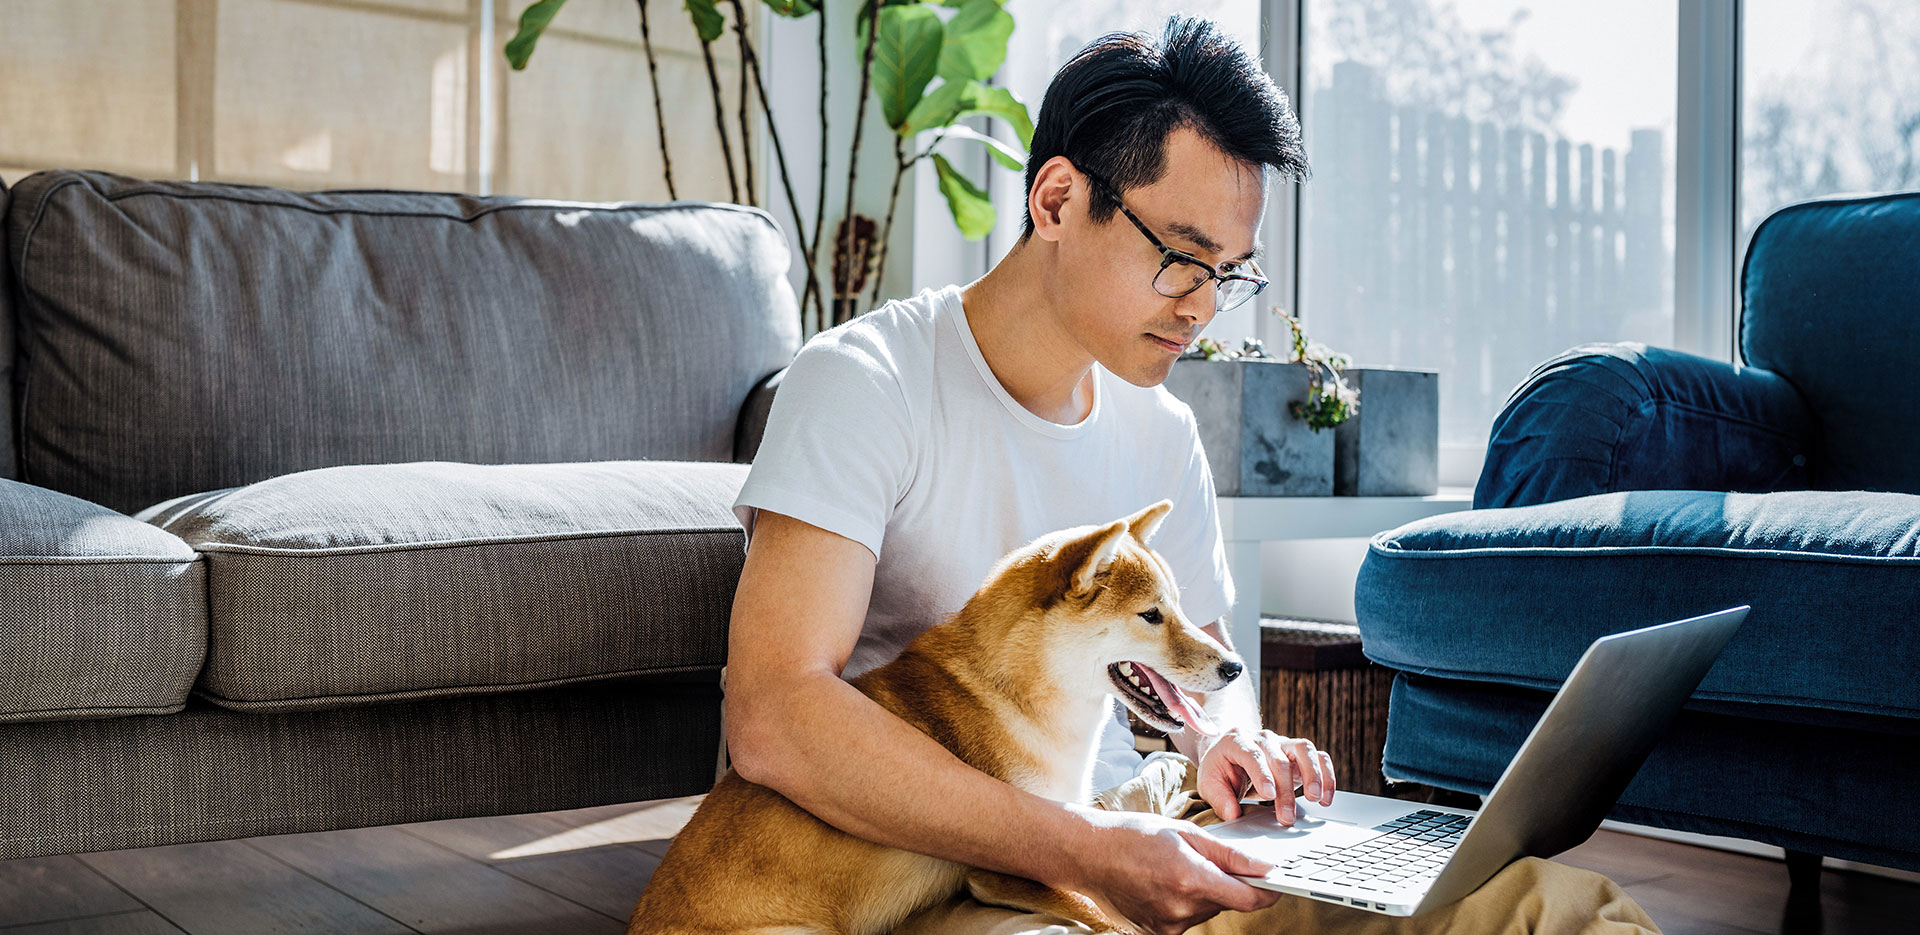 Man with dog on lap looks at laptop